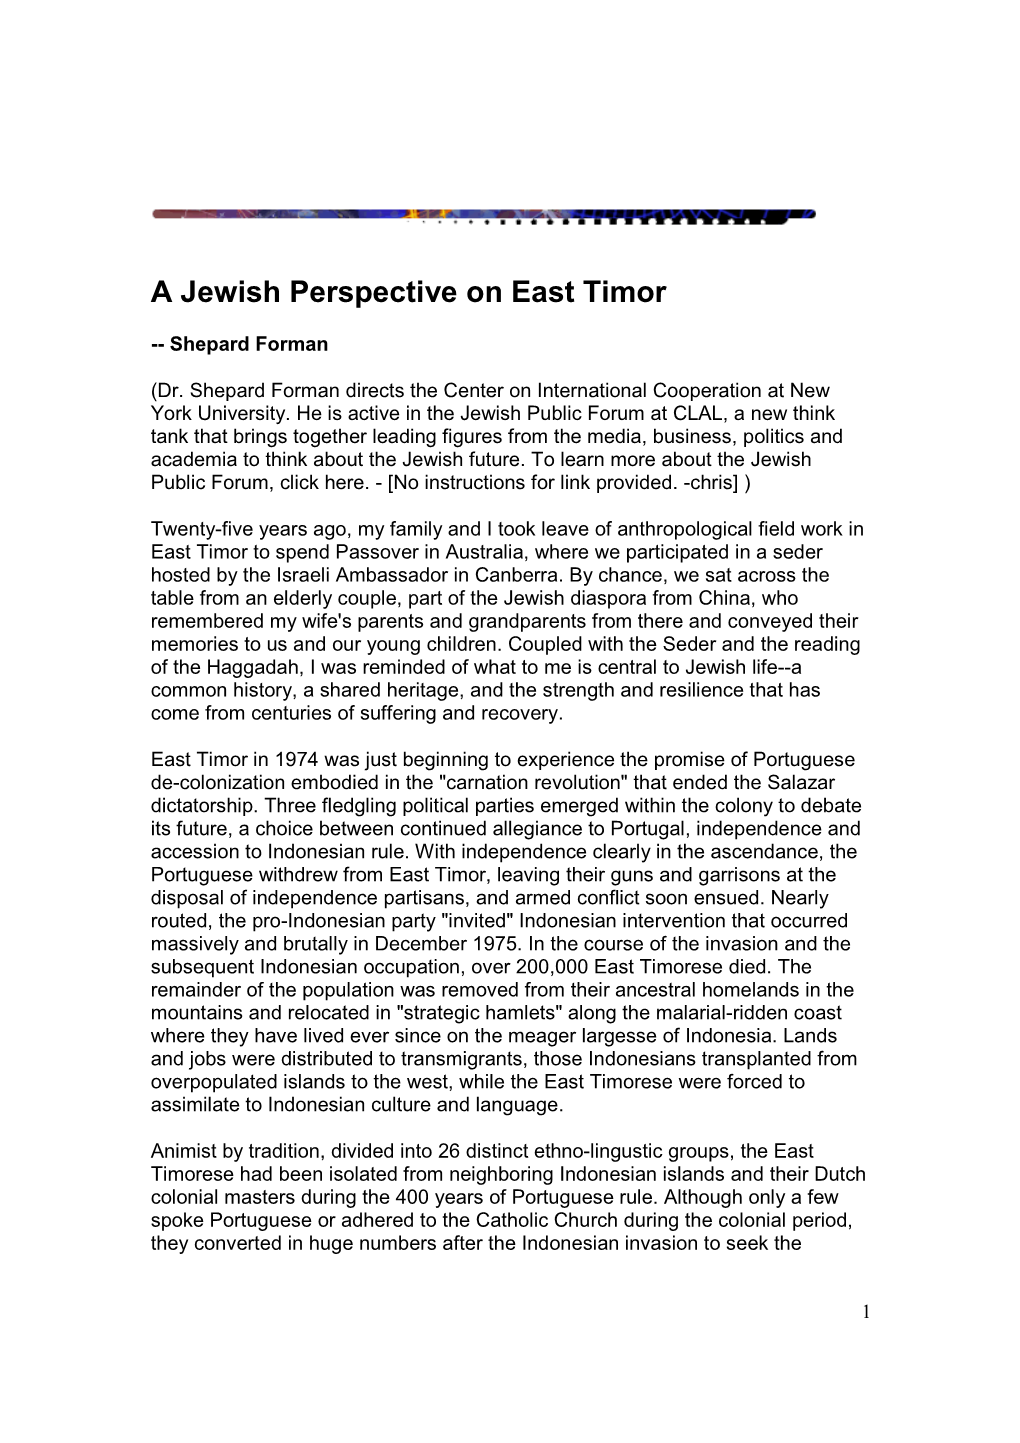 A Jewish Perspective on East Timor